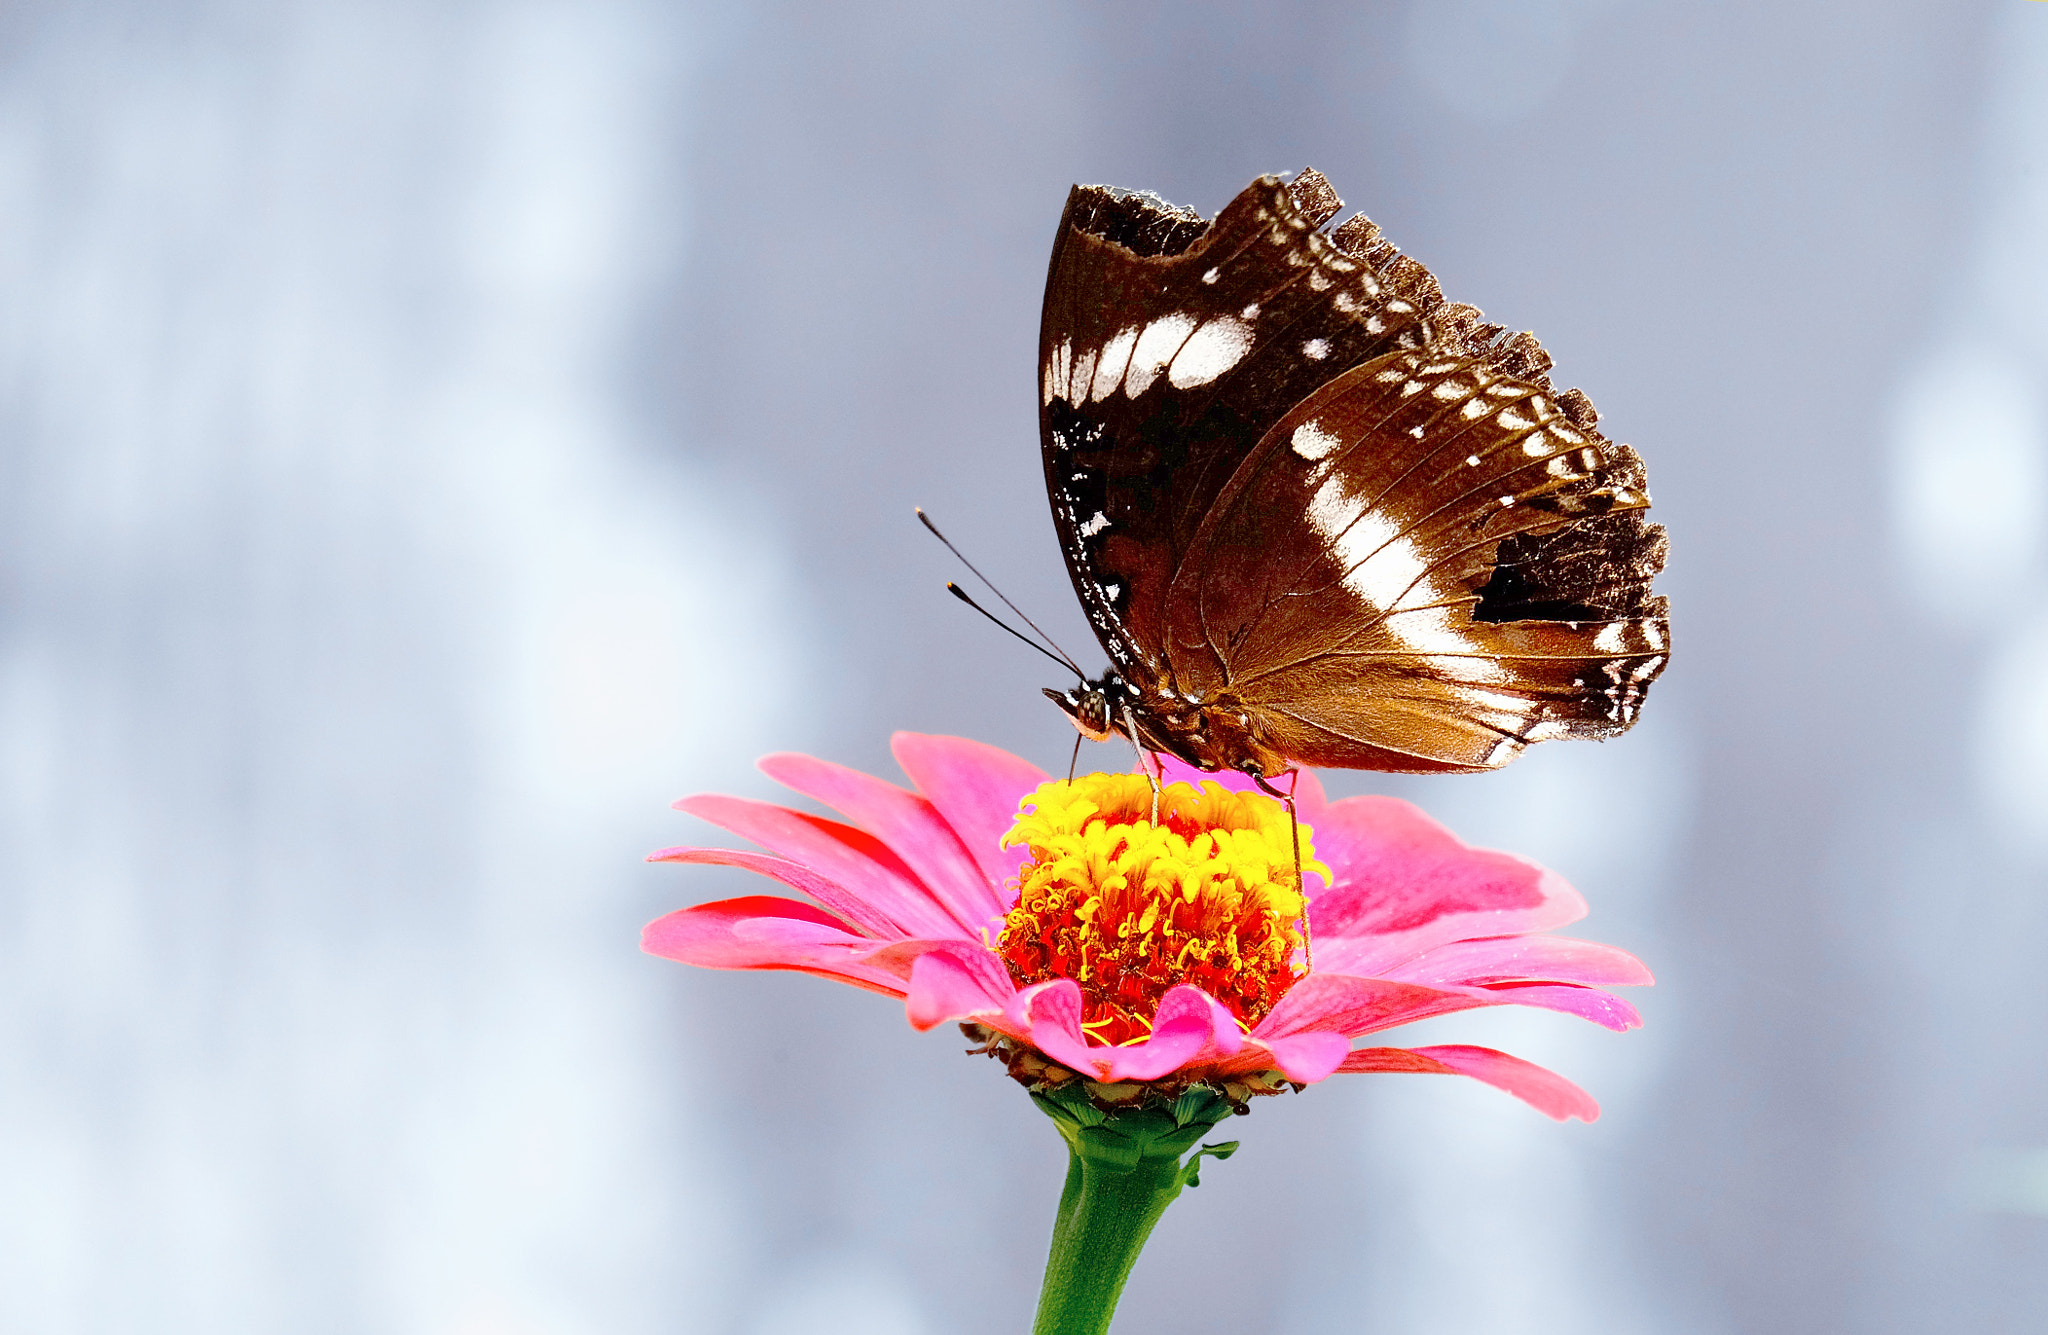 Fujifilm X-M1 + Fujifilm XC 50-230mm F4.5-6.7 OIS II sample photo. Butterfly finding nectar in flower photography